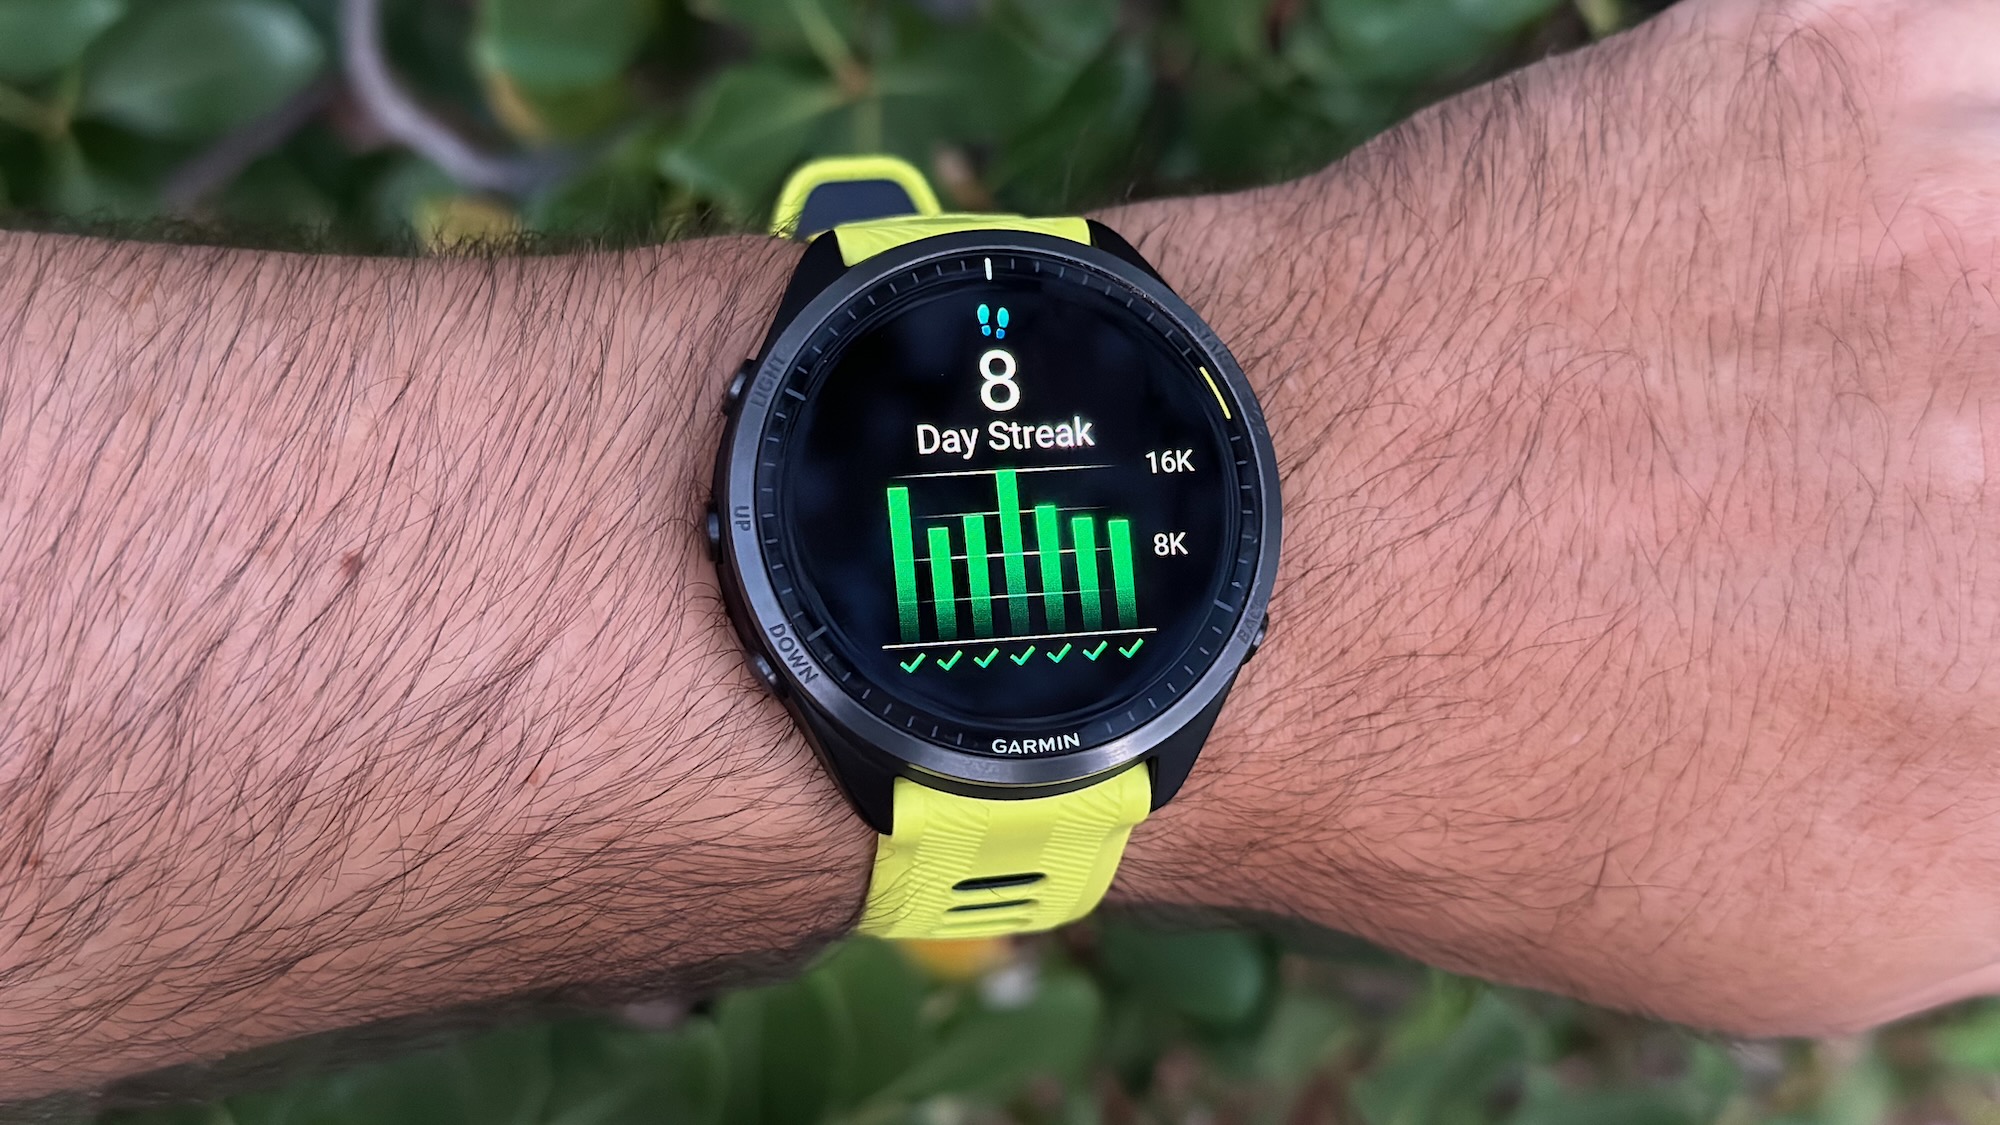 Don't miss out on this epic Garmin Vivoactive 4 deal if you don't